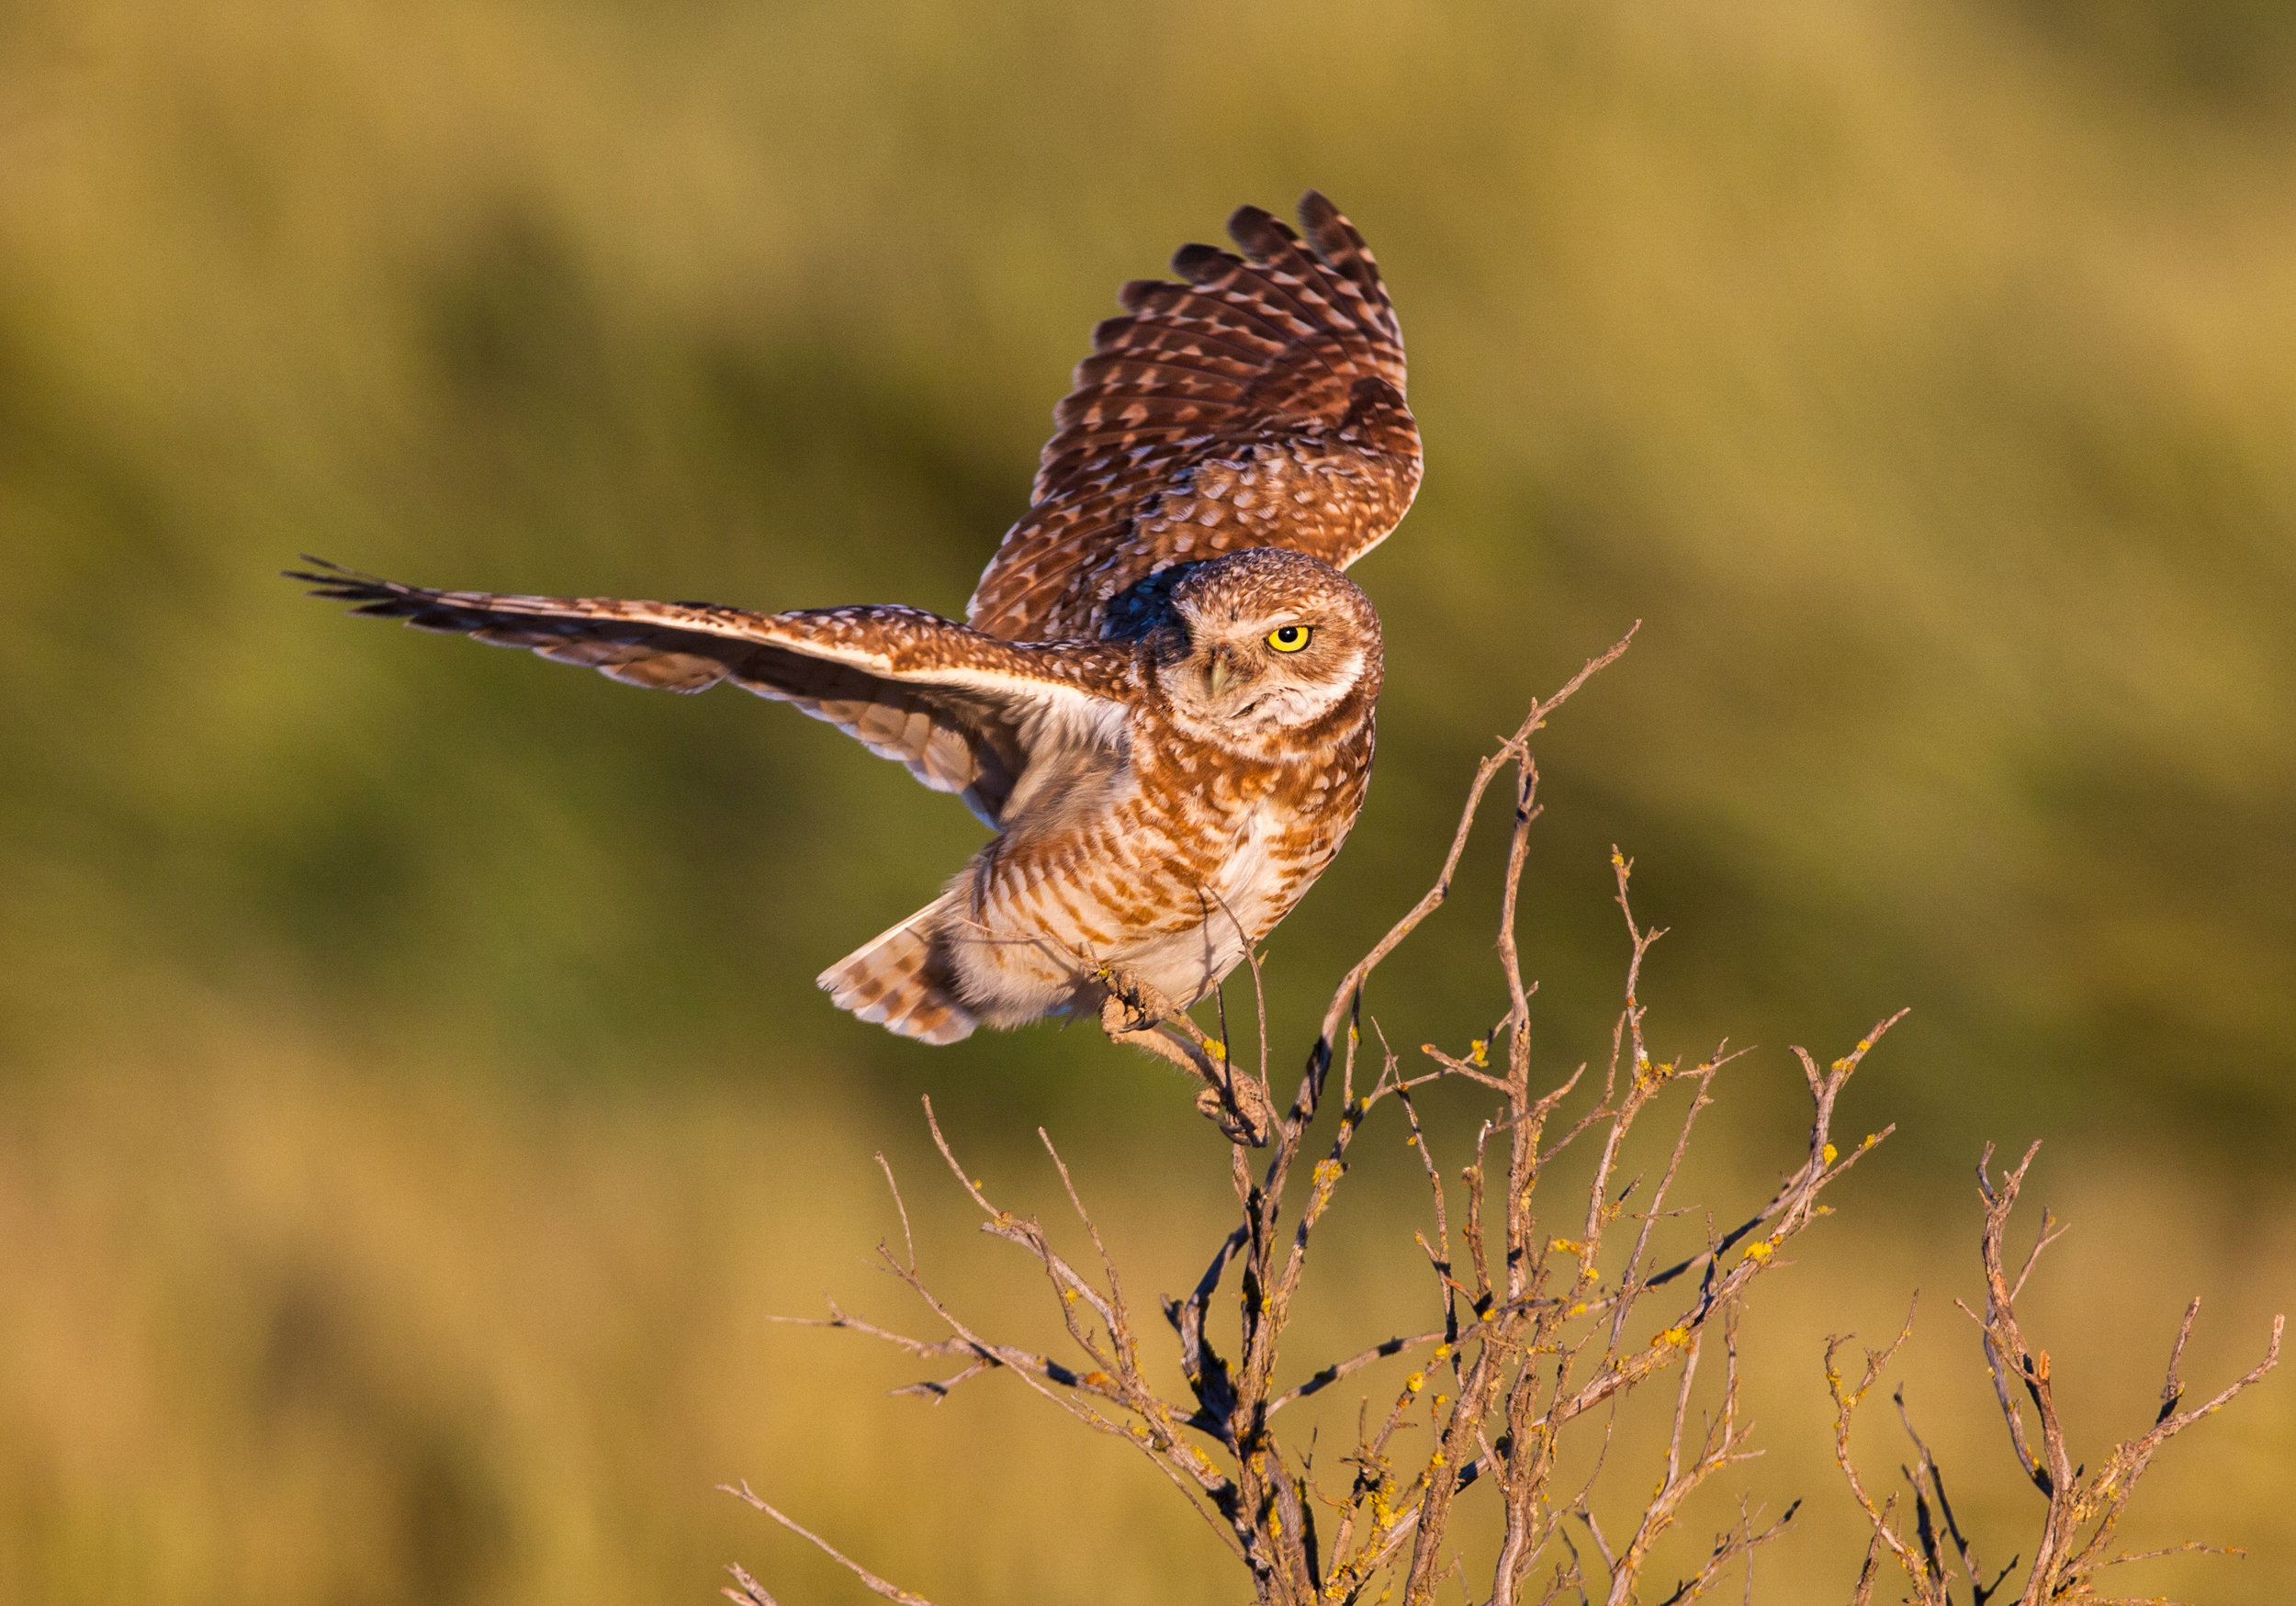  &nbsp;Paul Bannick's startling images reflect behaviors shared by all owls, as well as some surprising exceptions and adaptations. 